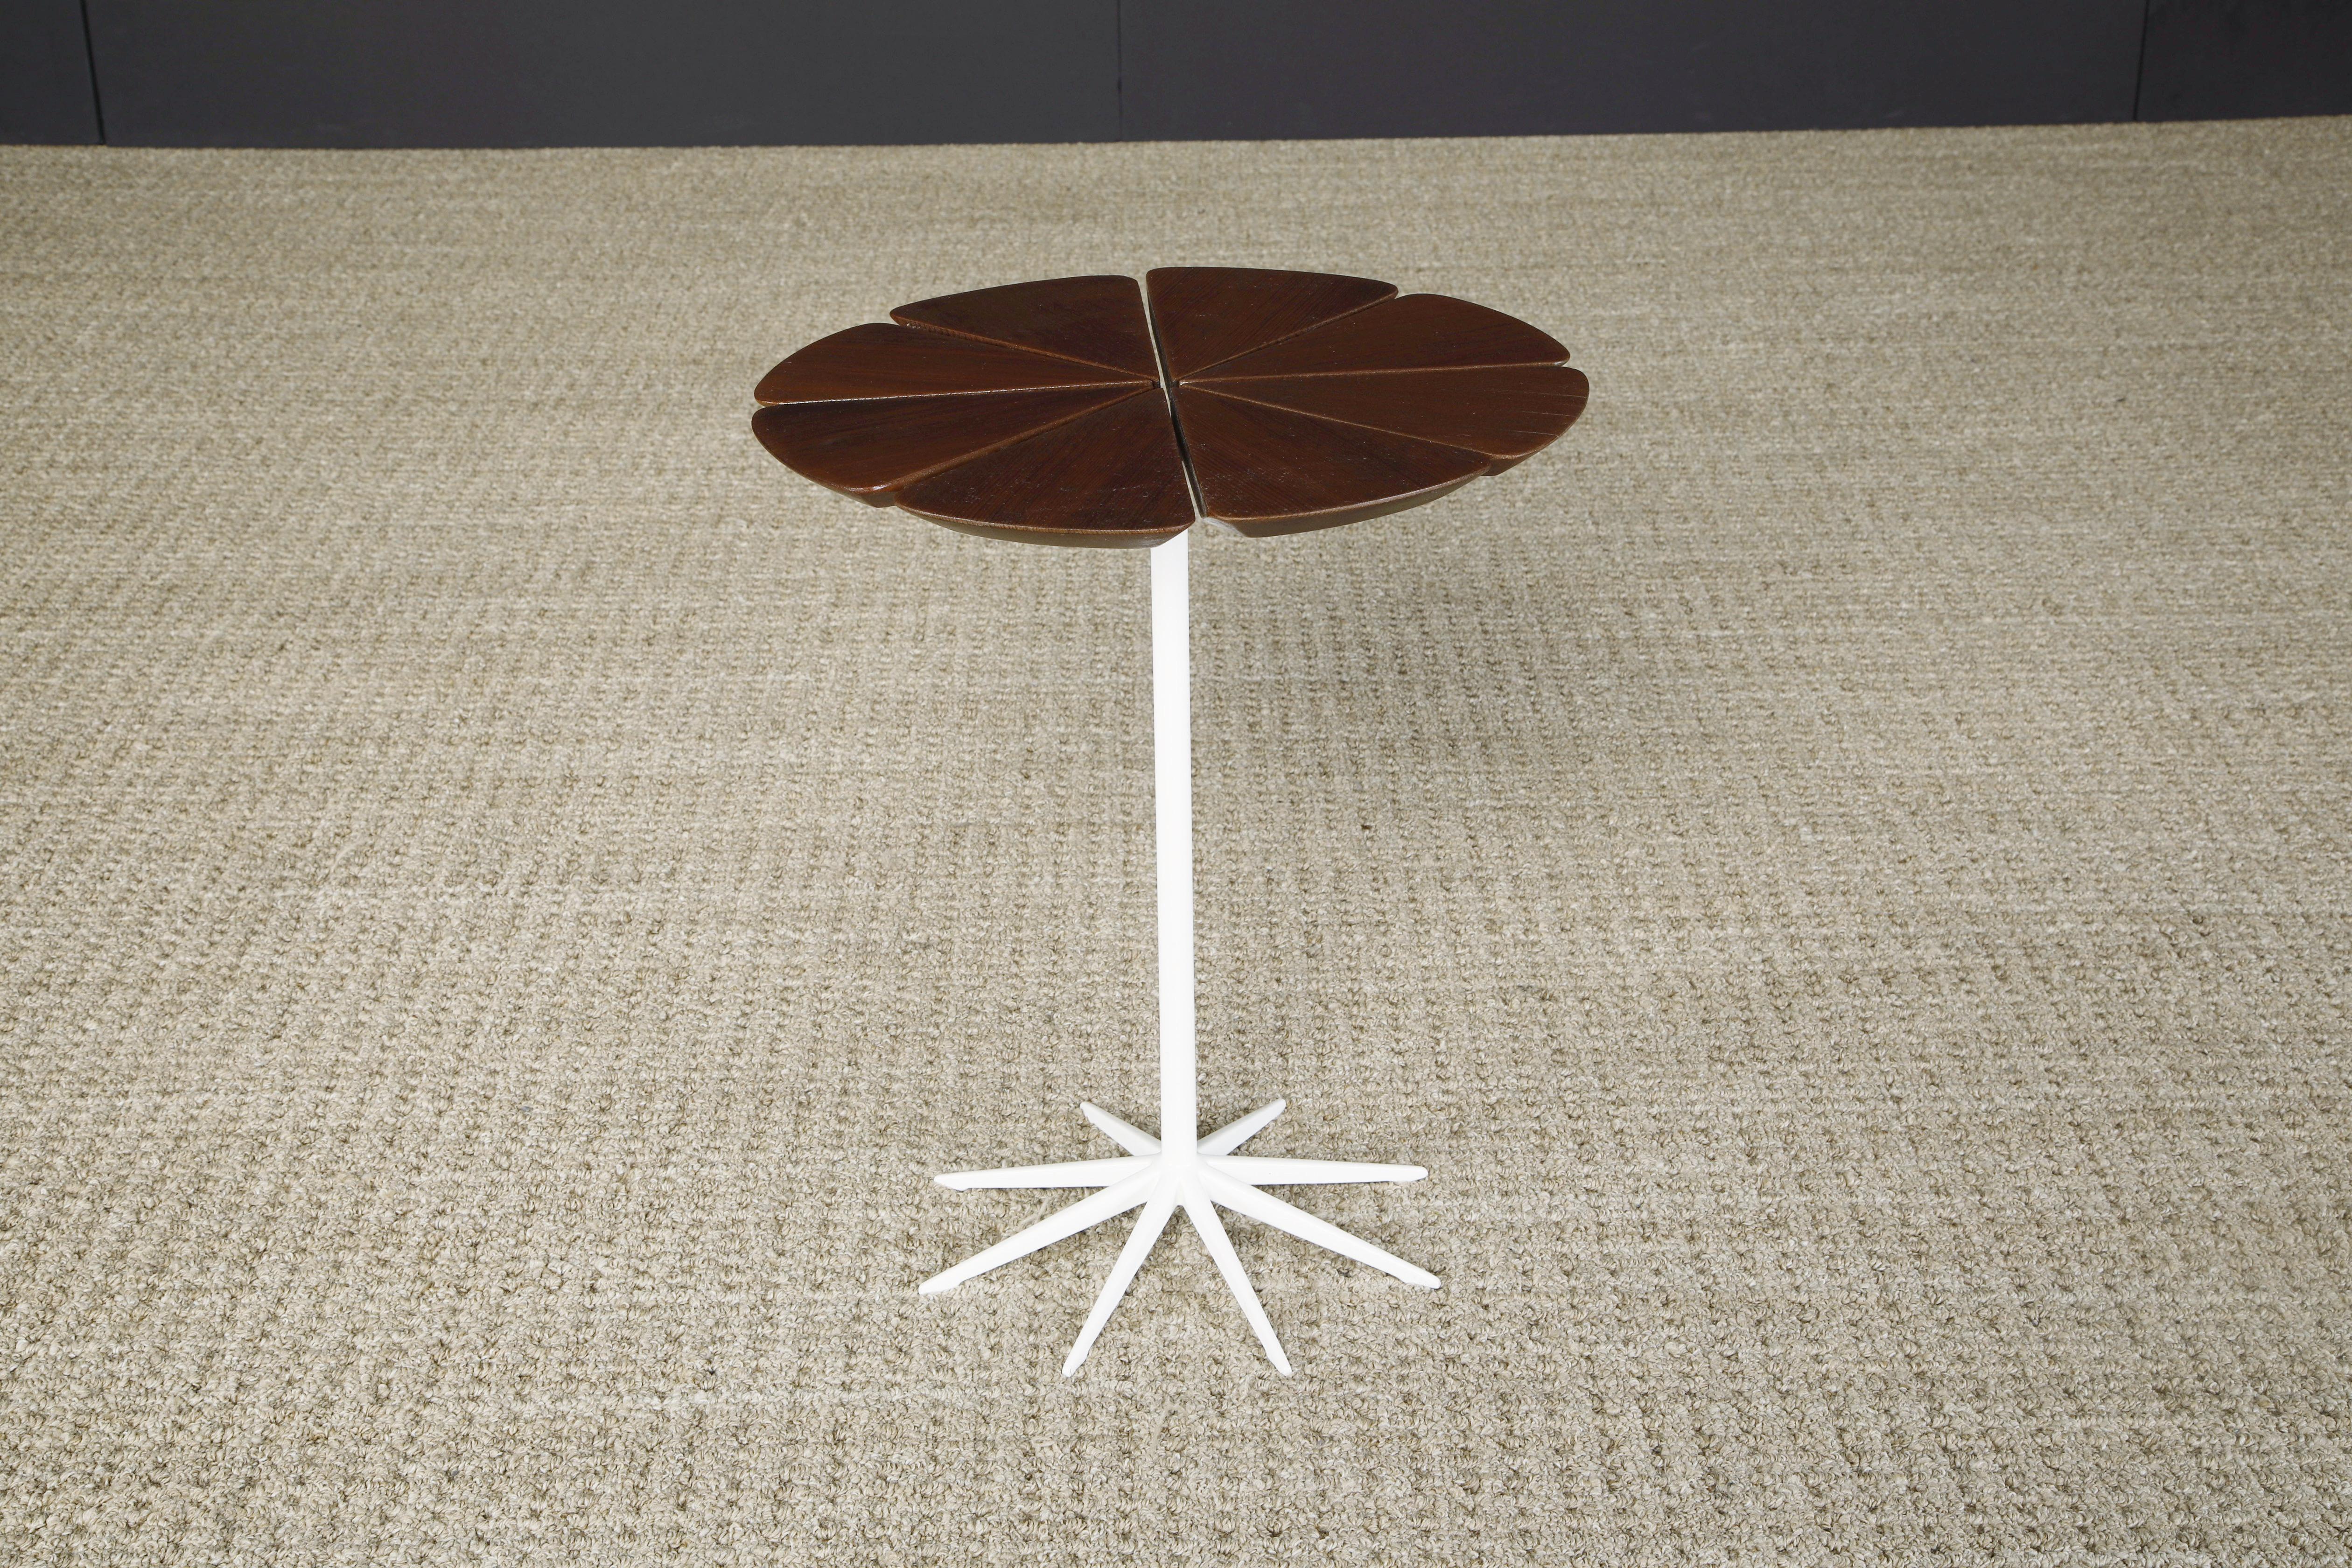 Mid-Century Modern 'Petal' Drinks / Side Table by Richard Schultz for Knoll Associates, Signed For Sale